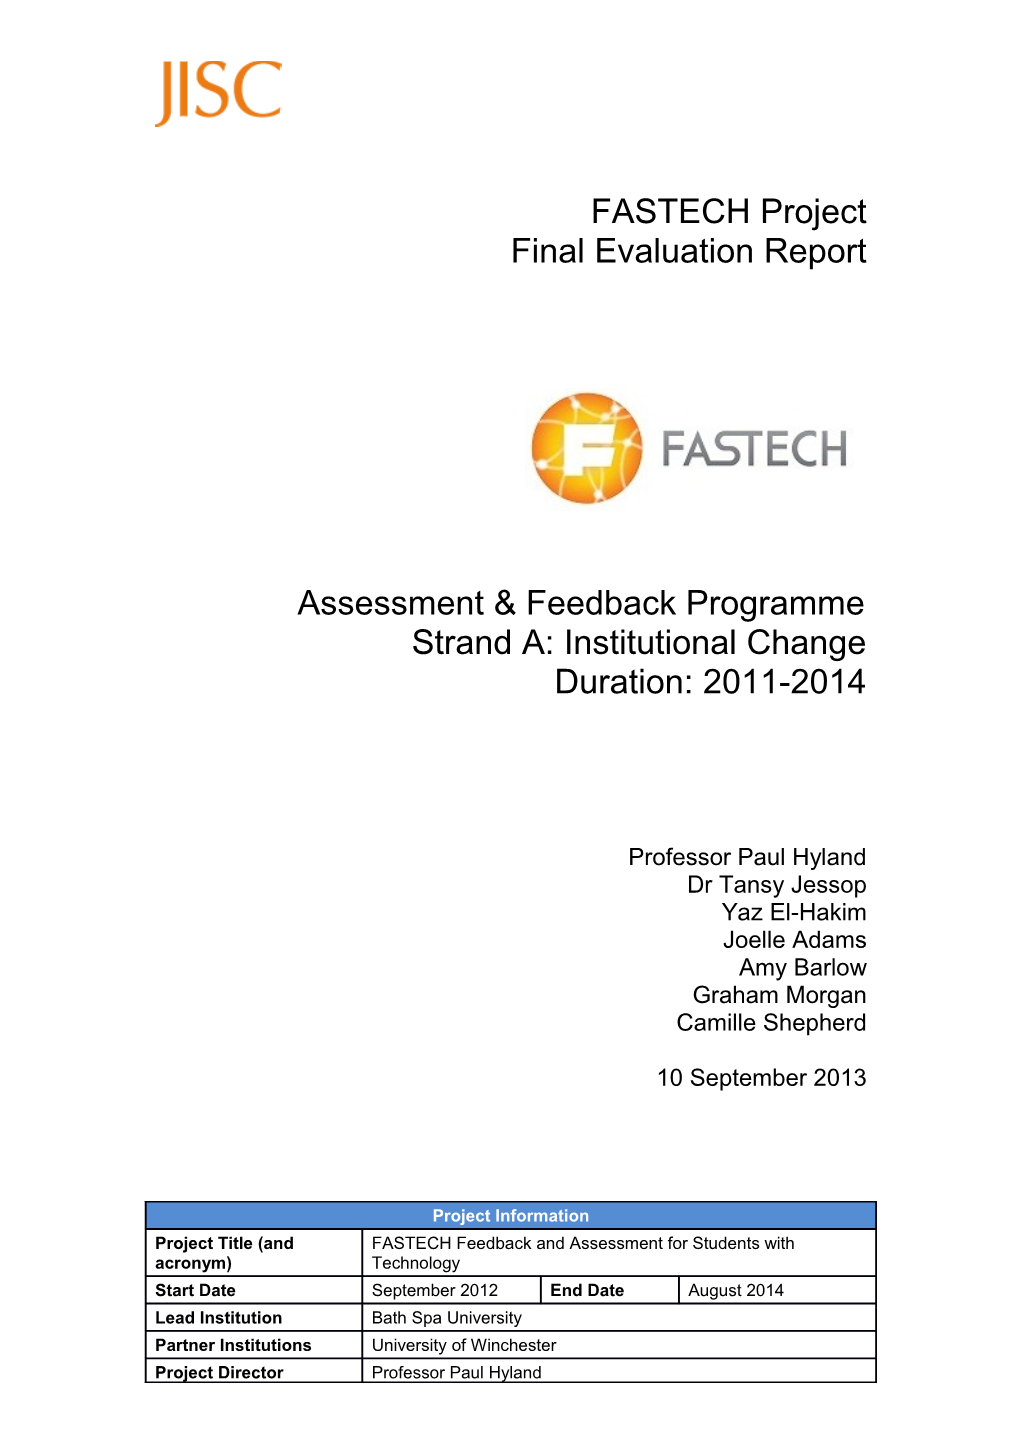 Assessment and Feedback Programme Final Evaluation Report Template